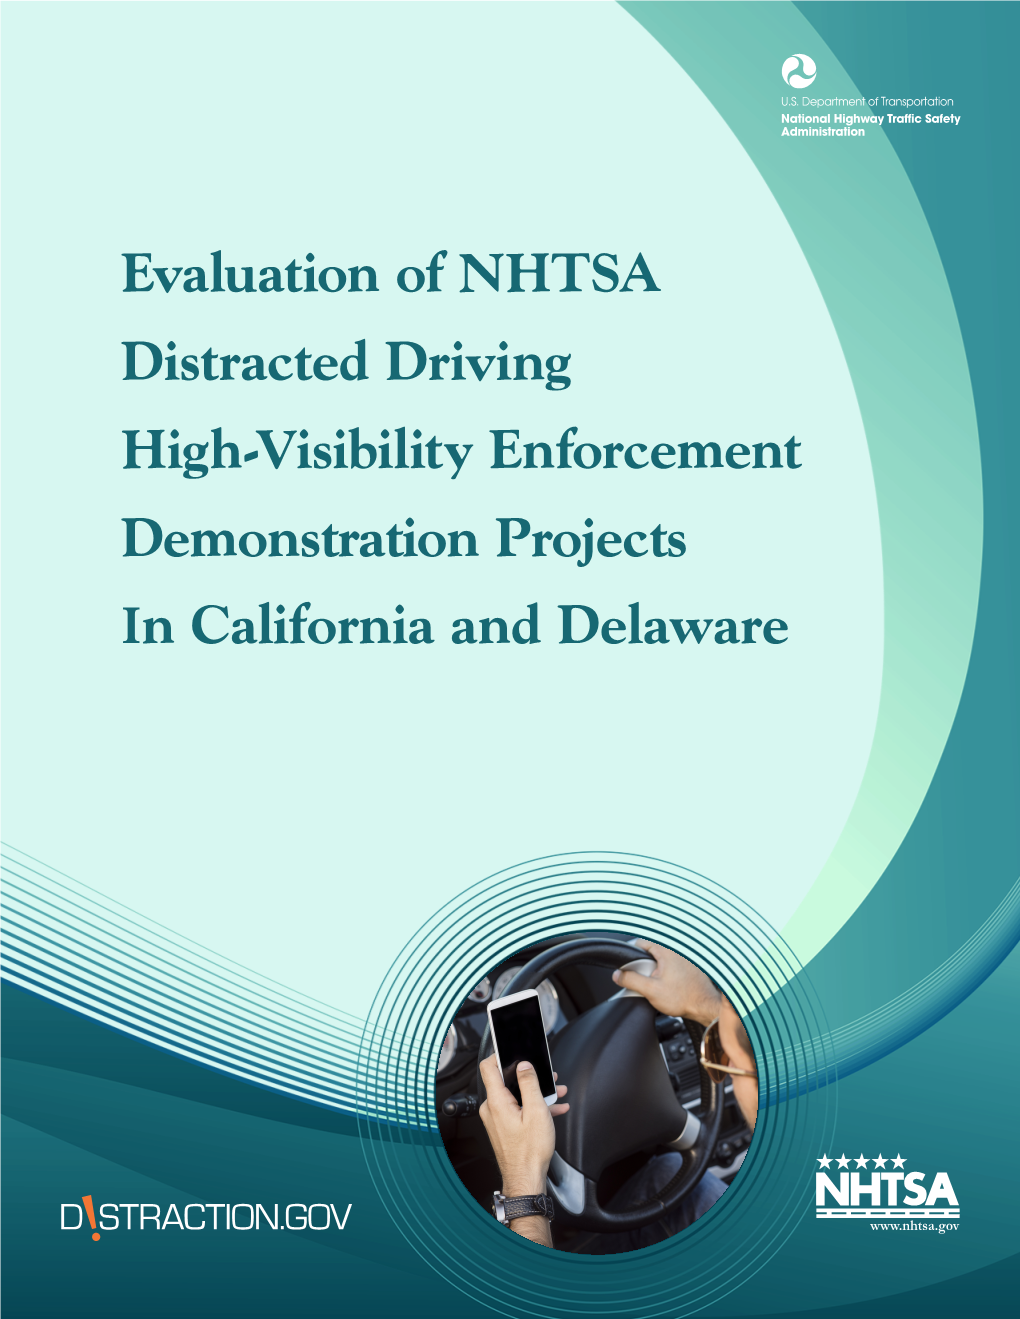 Evaluation of the NHTSA Distracted Driving High-Visibility Enforcement Demonstration Projects in California and Delaware